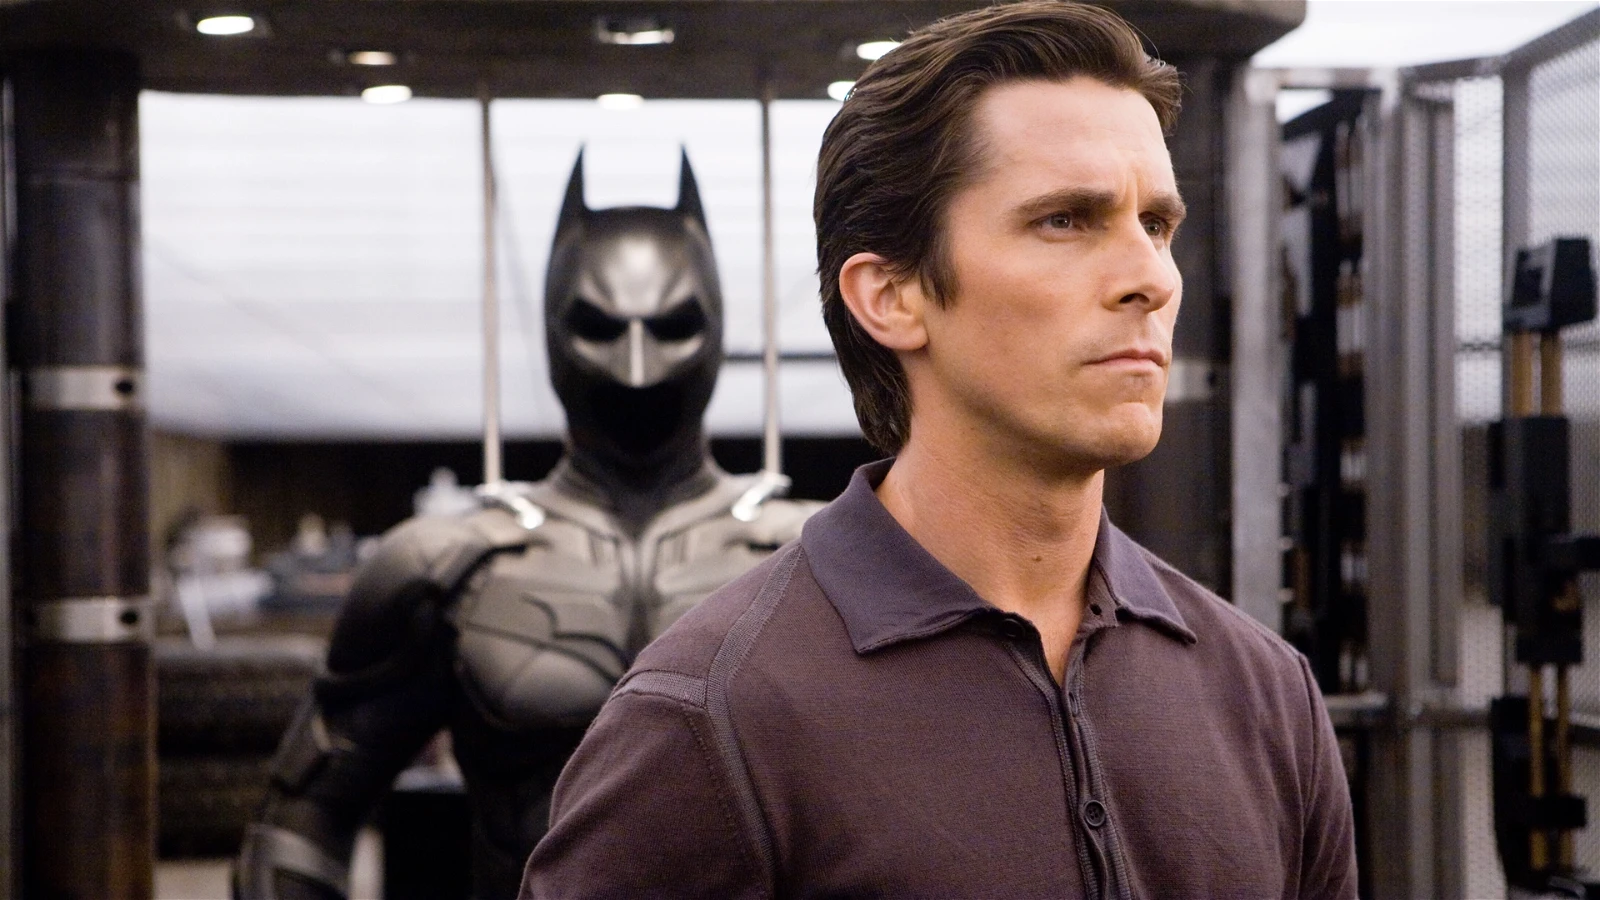 Christian Bale in a still from The Dark Knight